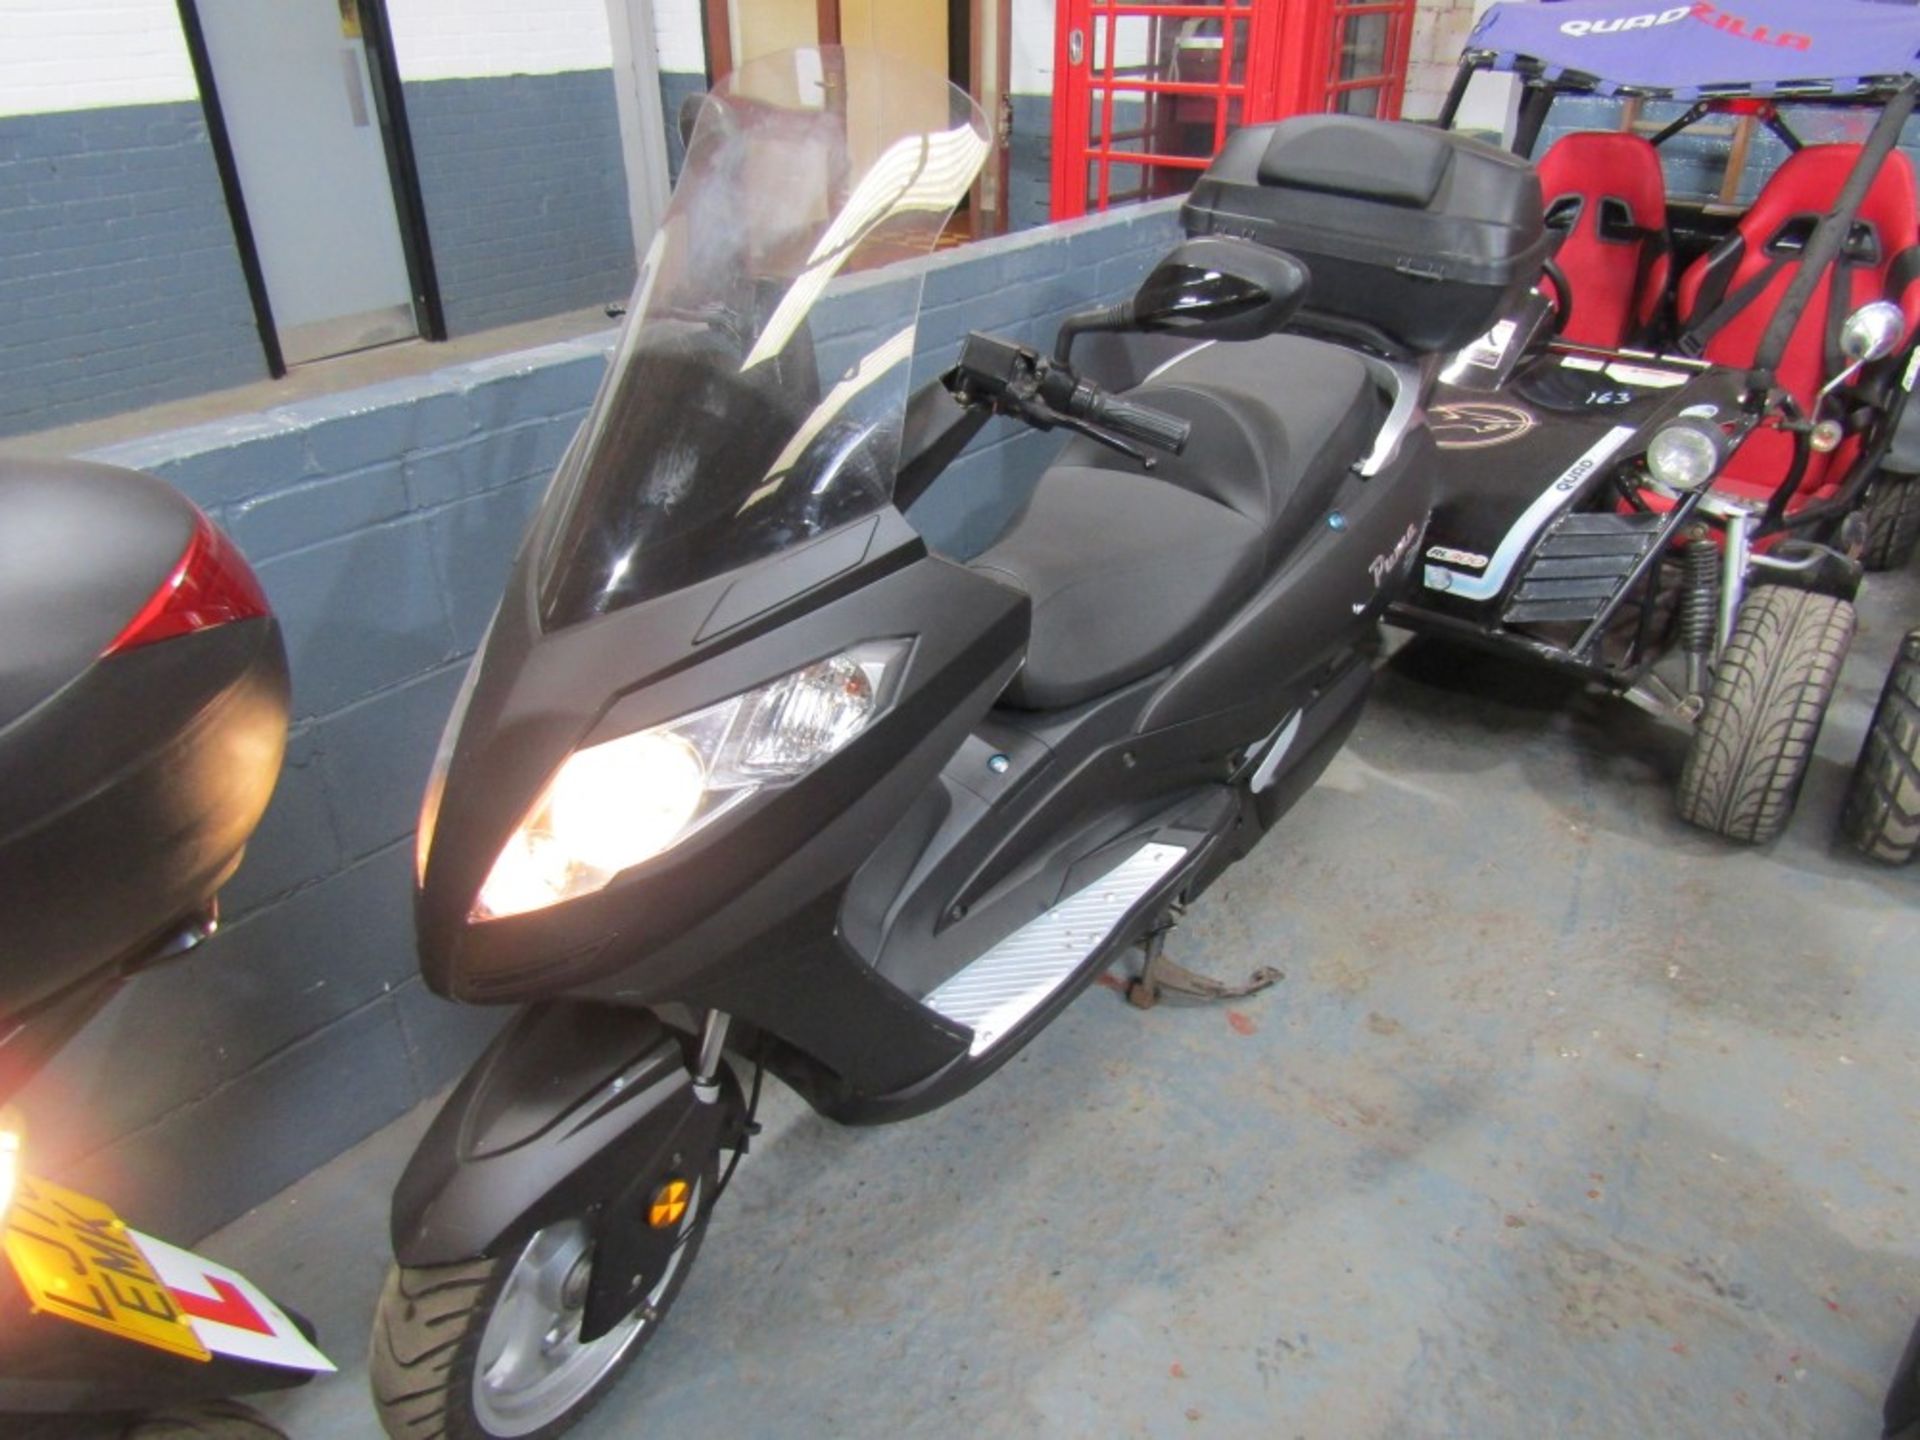 20 reg EFUN PUMA ELECTRIC SCOOTER, 1ST REG 07/20, 6795KM, V5 HERE, 1 OWNER FROM NEW [NO VAT]